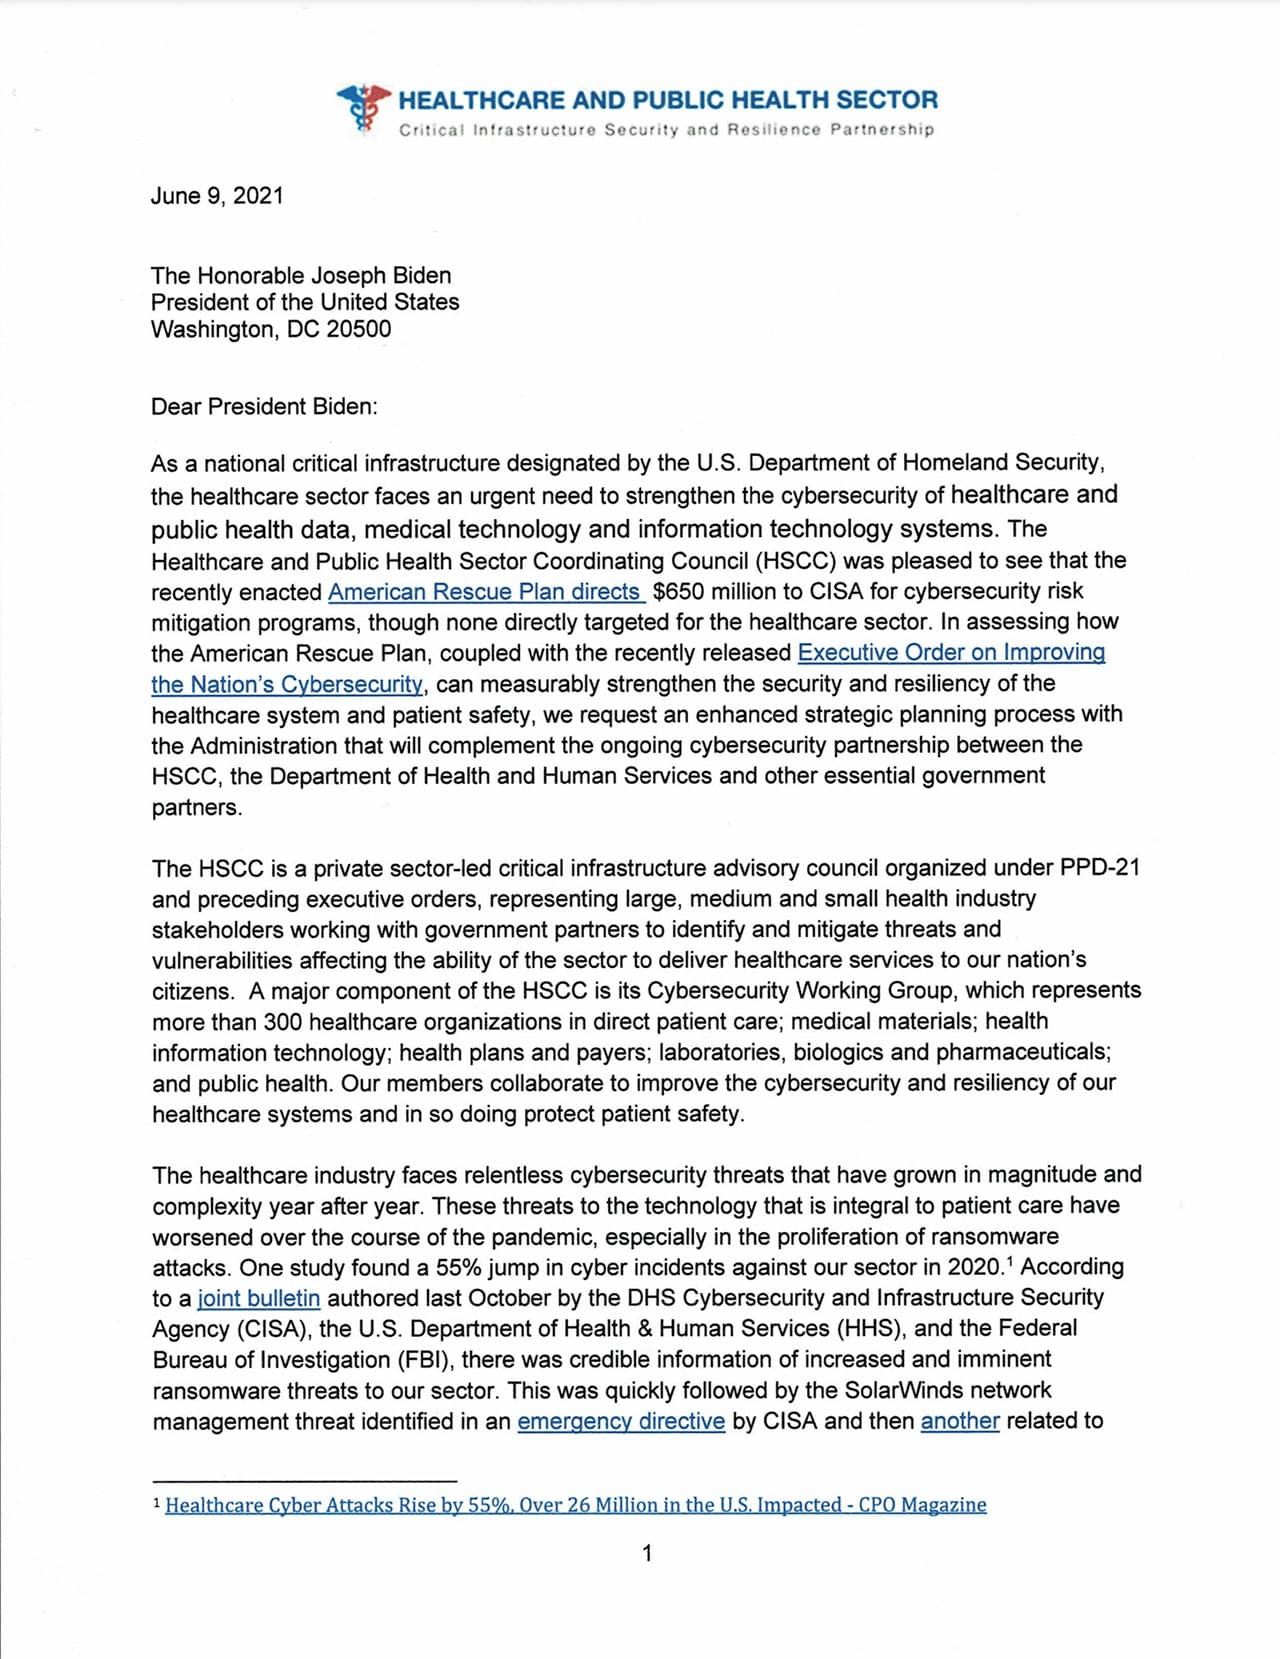 06/09/2021: Health Sector Cybersecurity Letter to President Biden